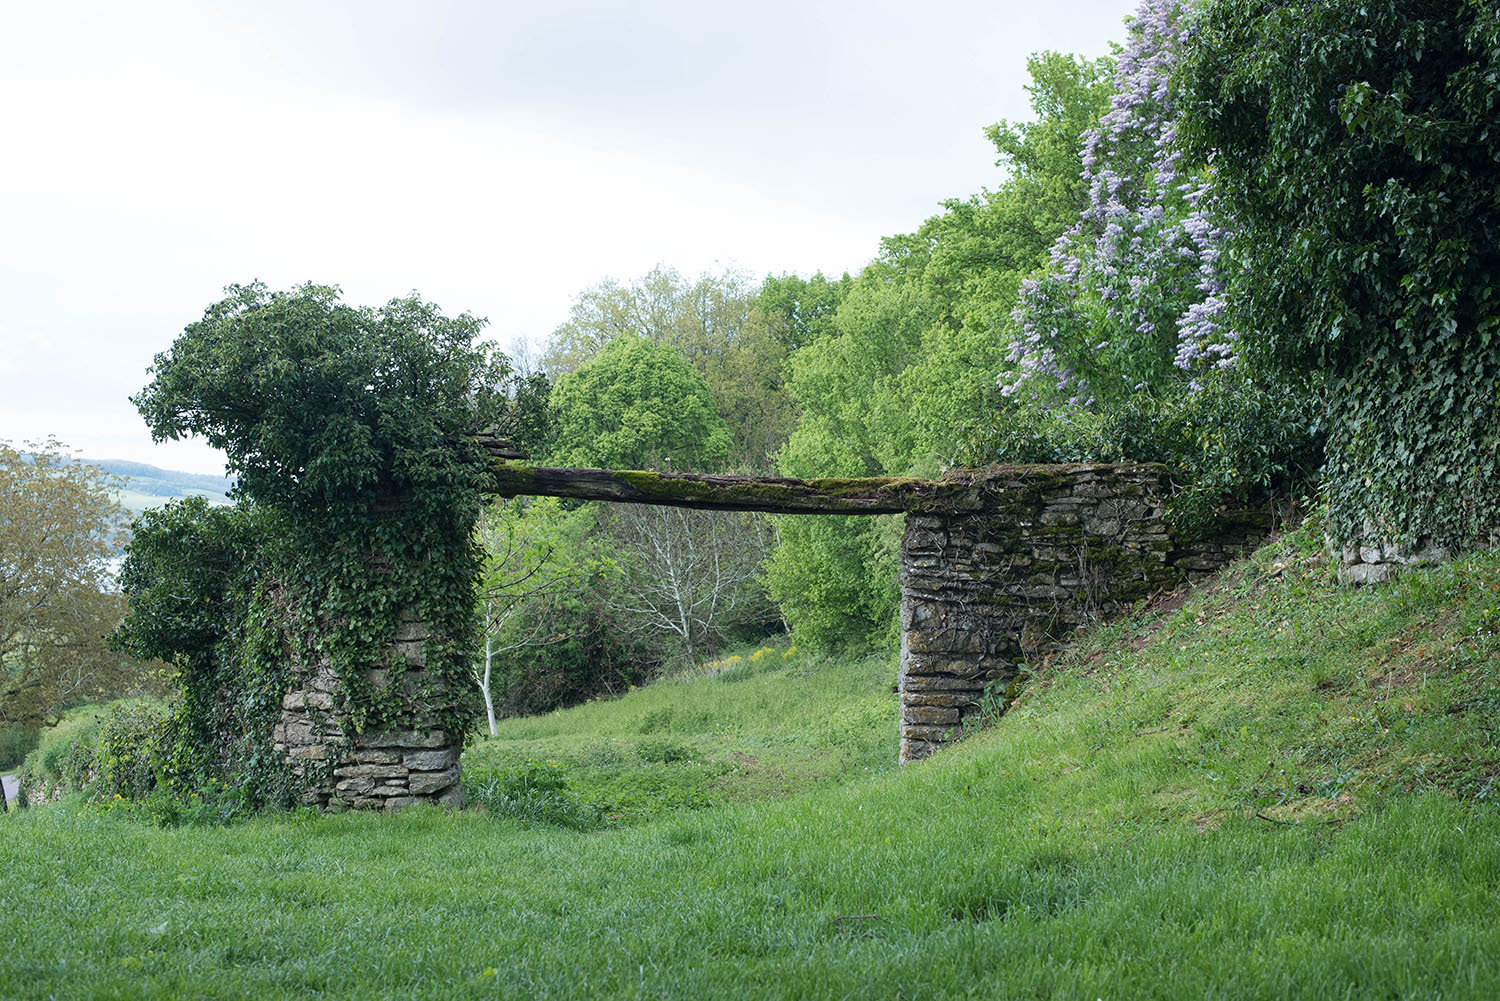 A stone arch on a hill in Burgundy, France, captured by Canadian travel blogger Cee Fardoe of Coco & Vera